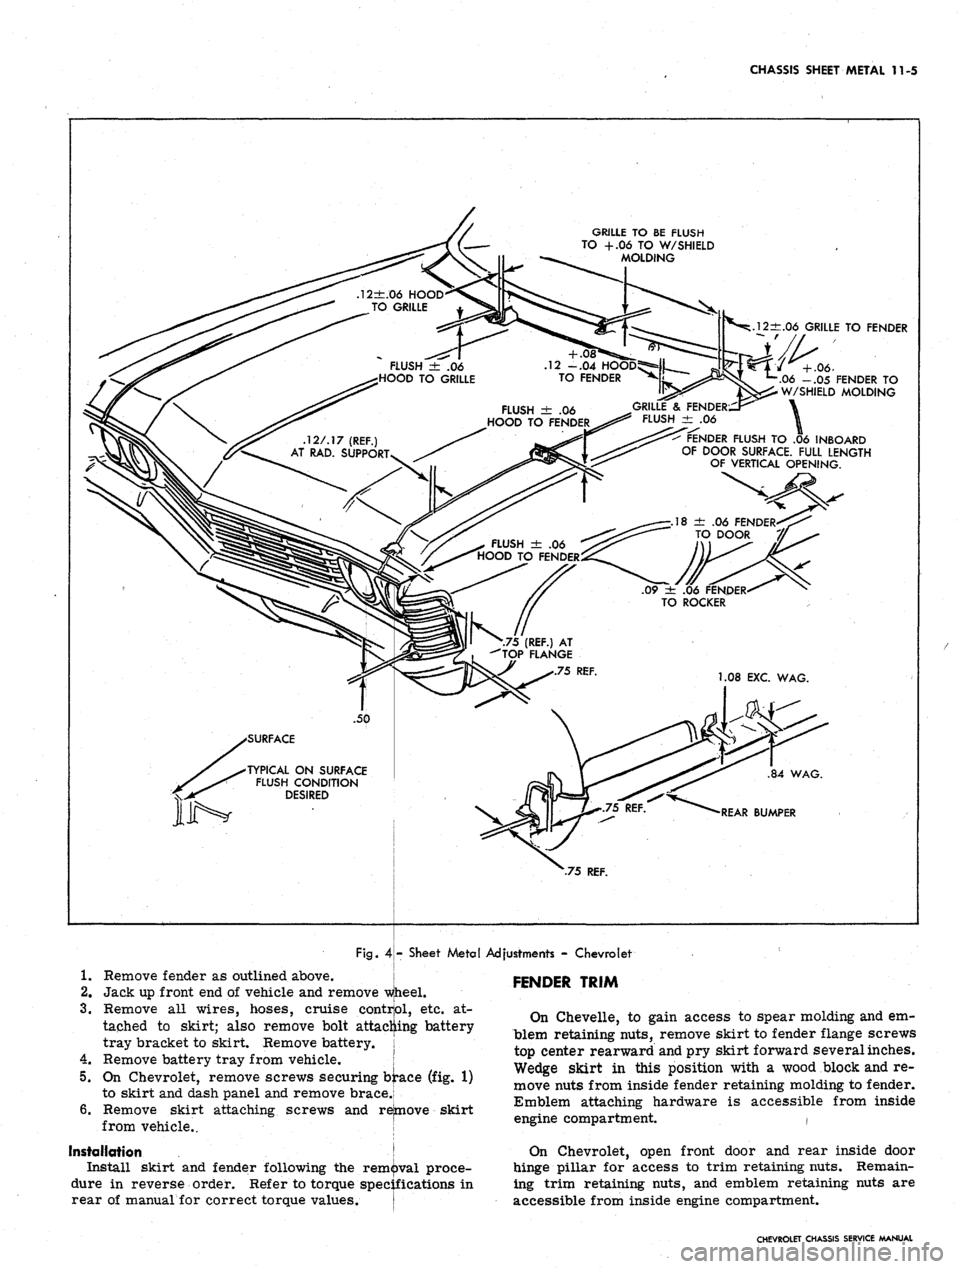 CHEVROLET CAMARO 1967 1.G Chassis Workshop Manual 
CHASSIS SHEET METAL 11-5

GRILLE TO BE FLUSH

TO +.06 TO W/SHIELD

MOLDING

±.06 GRILLE TO FENDER

.06 -.05 FENDER TO

W/SHIELD MOLDING

GRILLE"
 & FENDER; ~ ~

FLUSH ± .06

FENDER FLUSH TO .06 INB